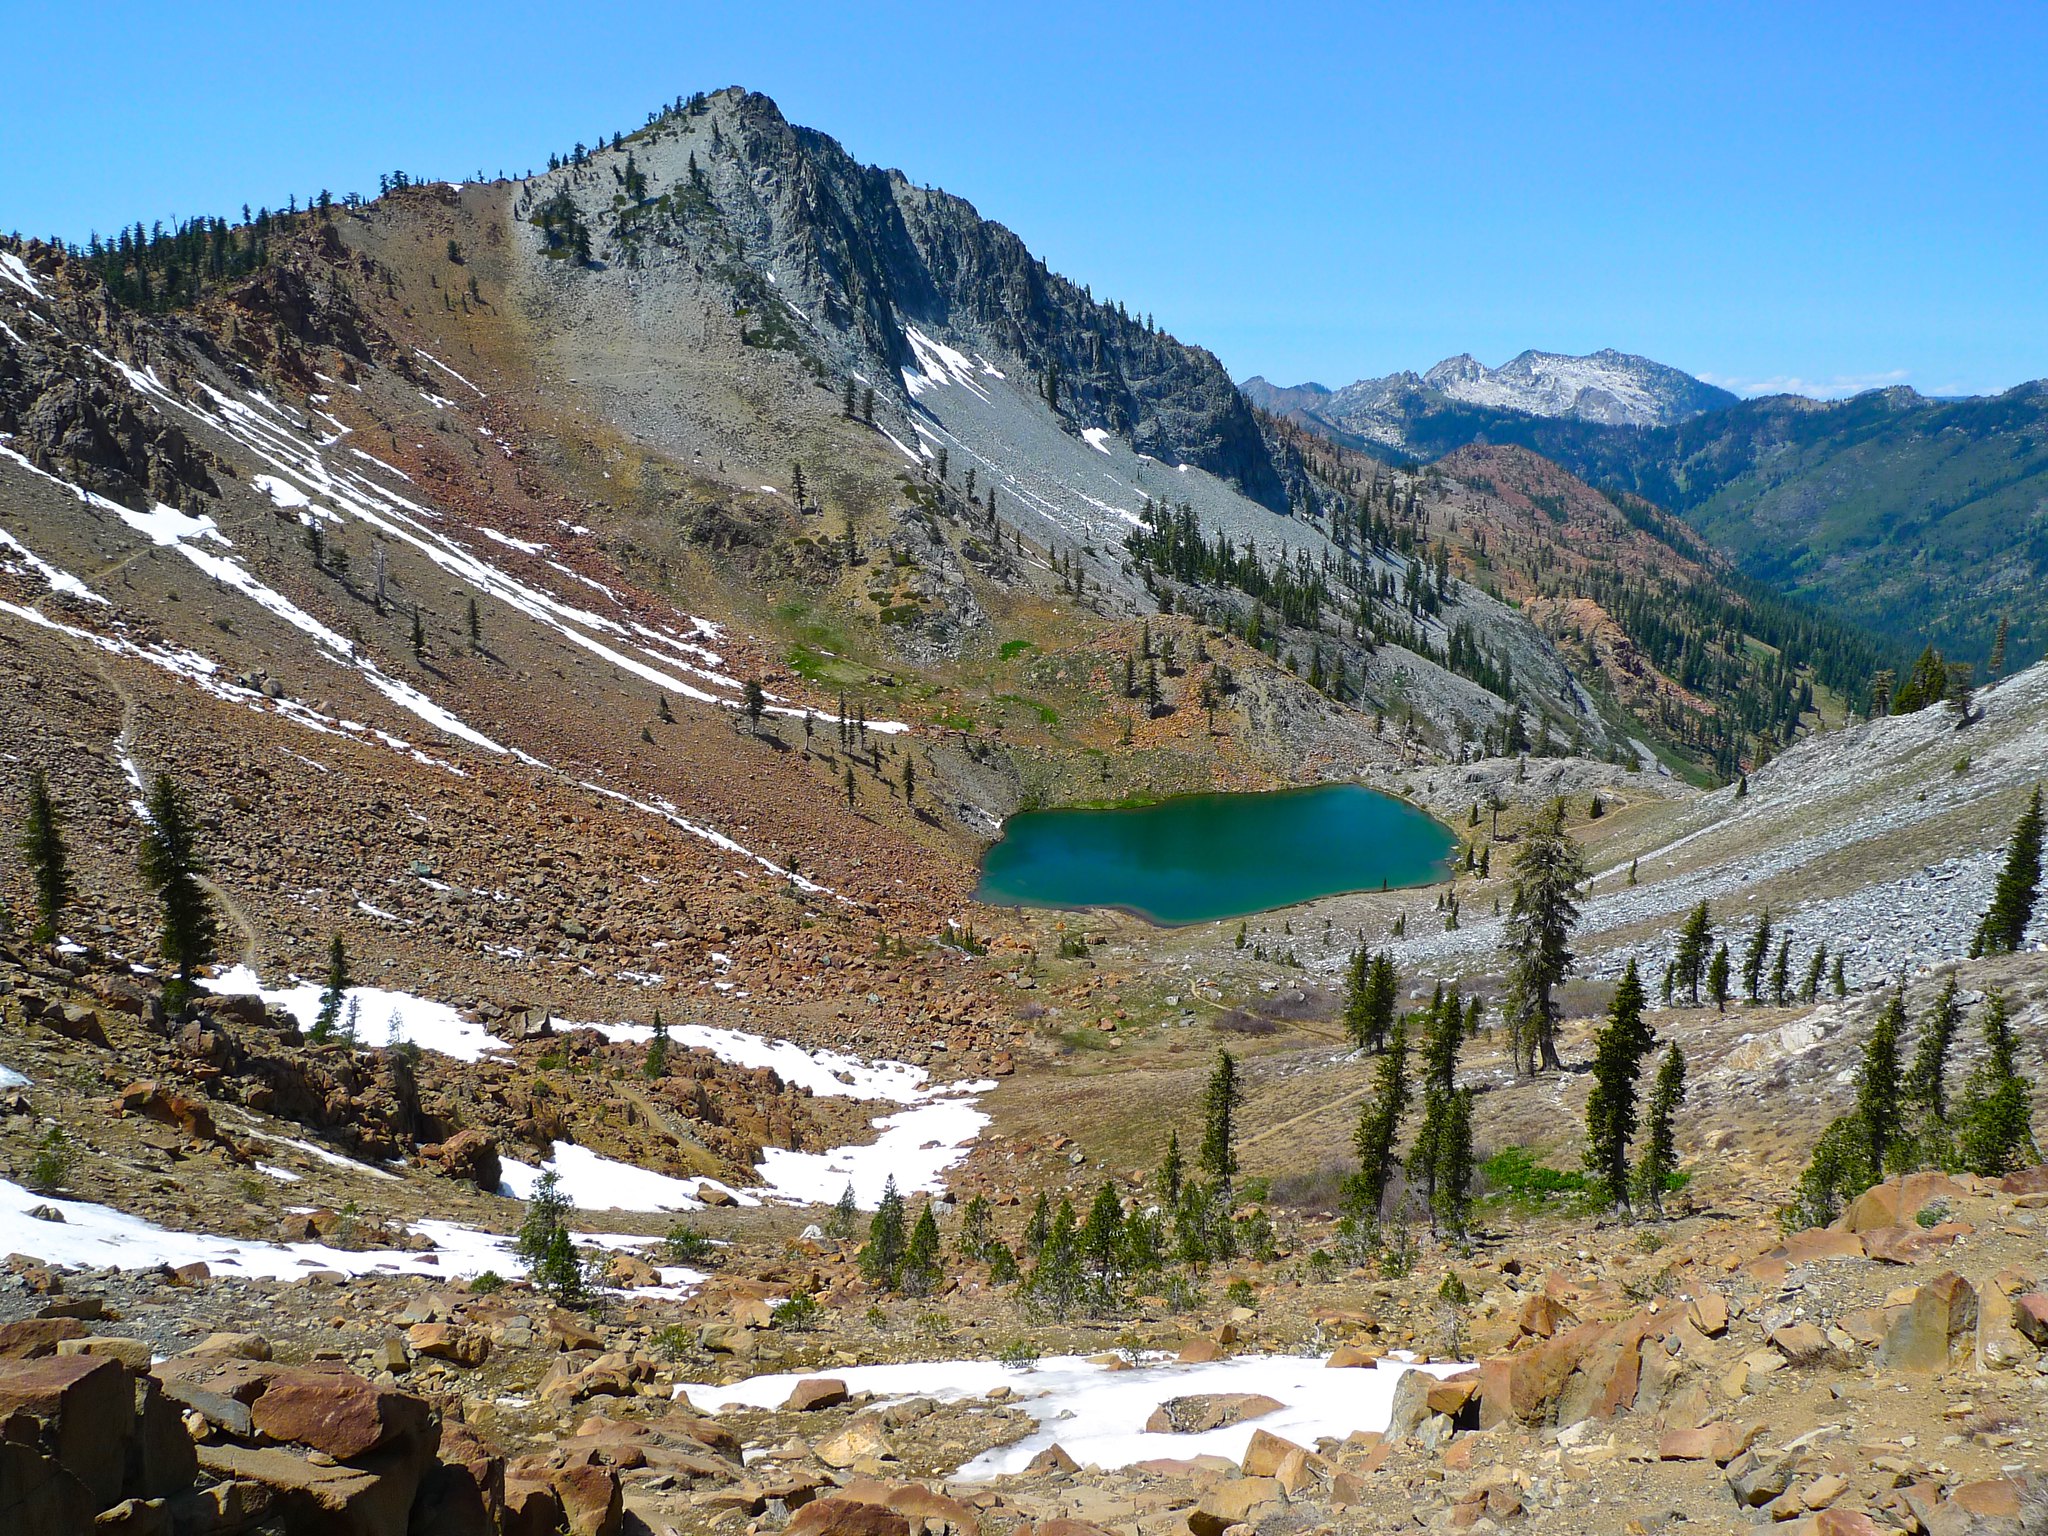 The views are great atop Deer Pass. Siligo Peak and Deer Lake in the foregrund and the White Trinities in the background.